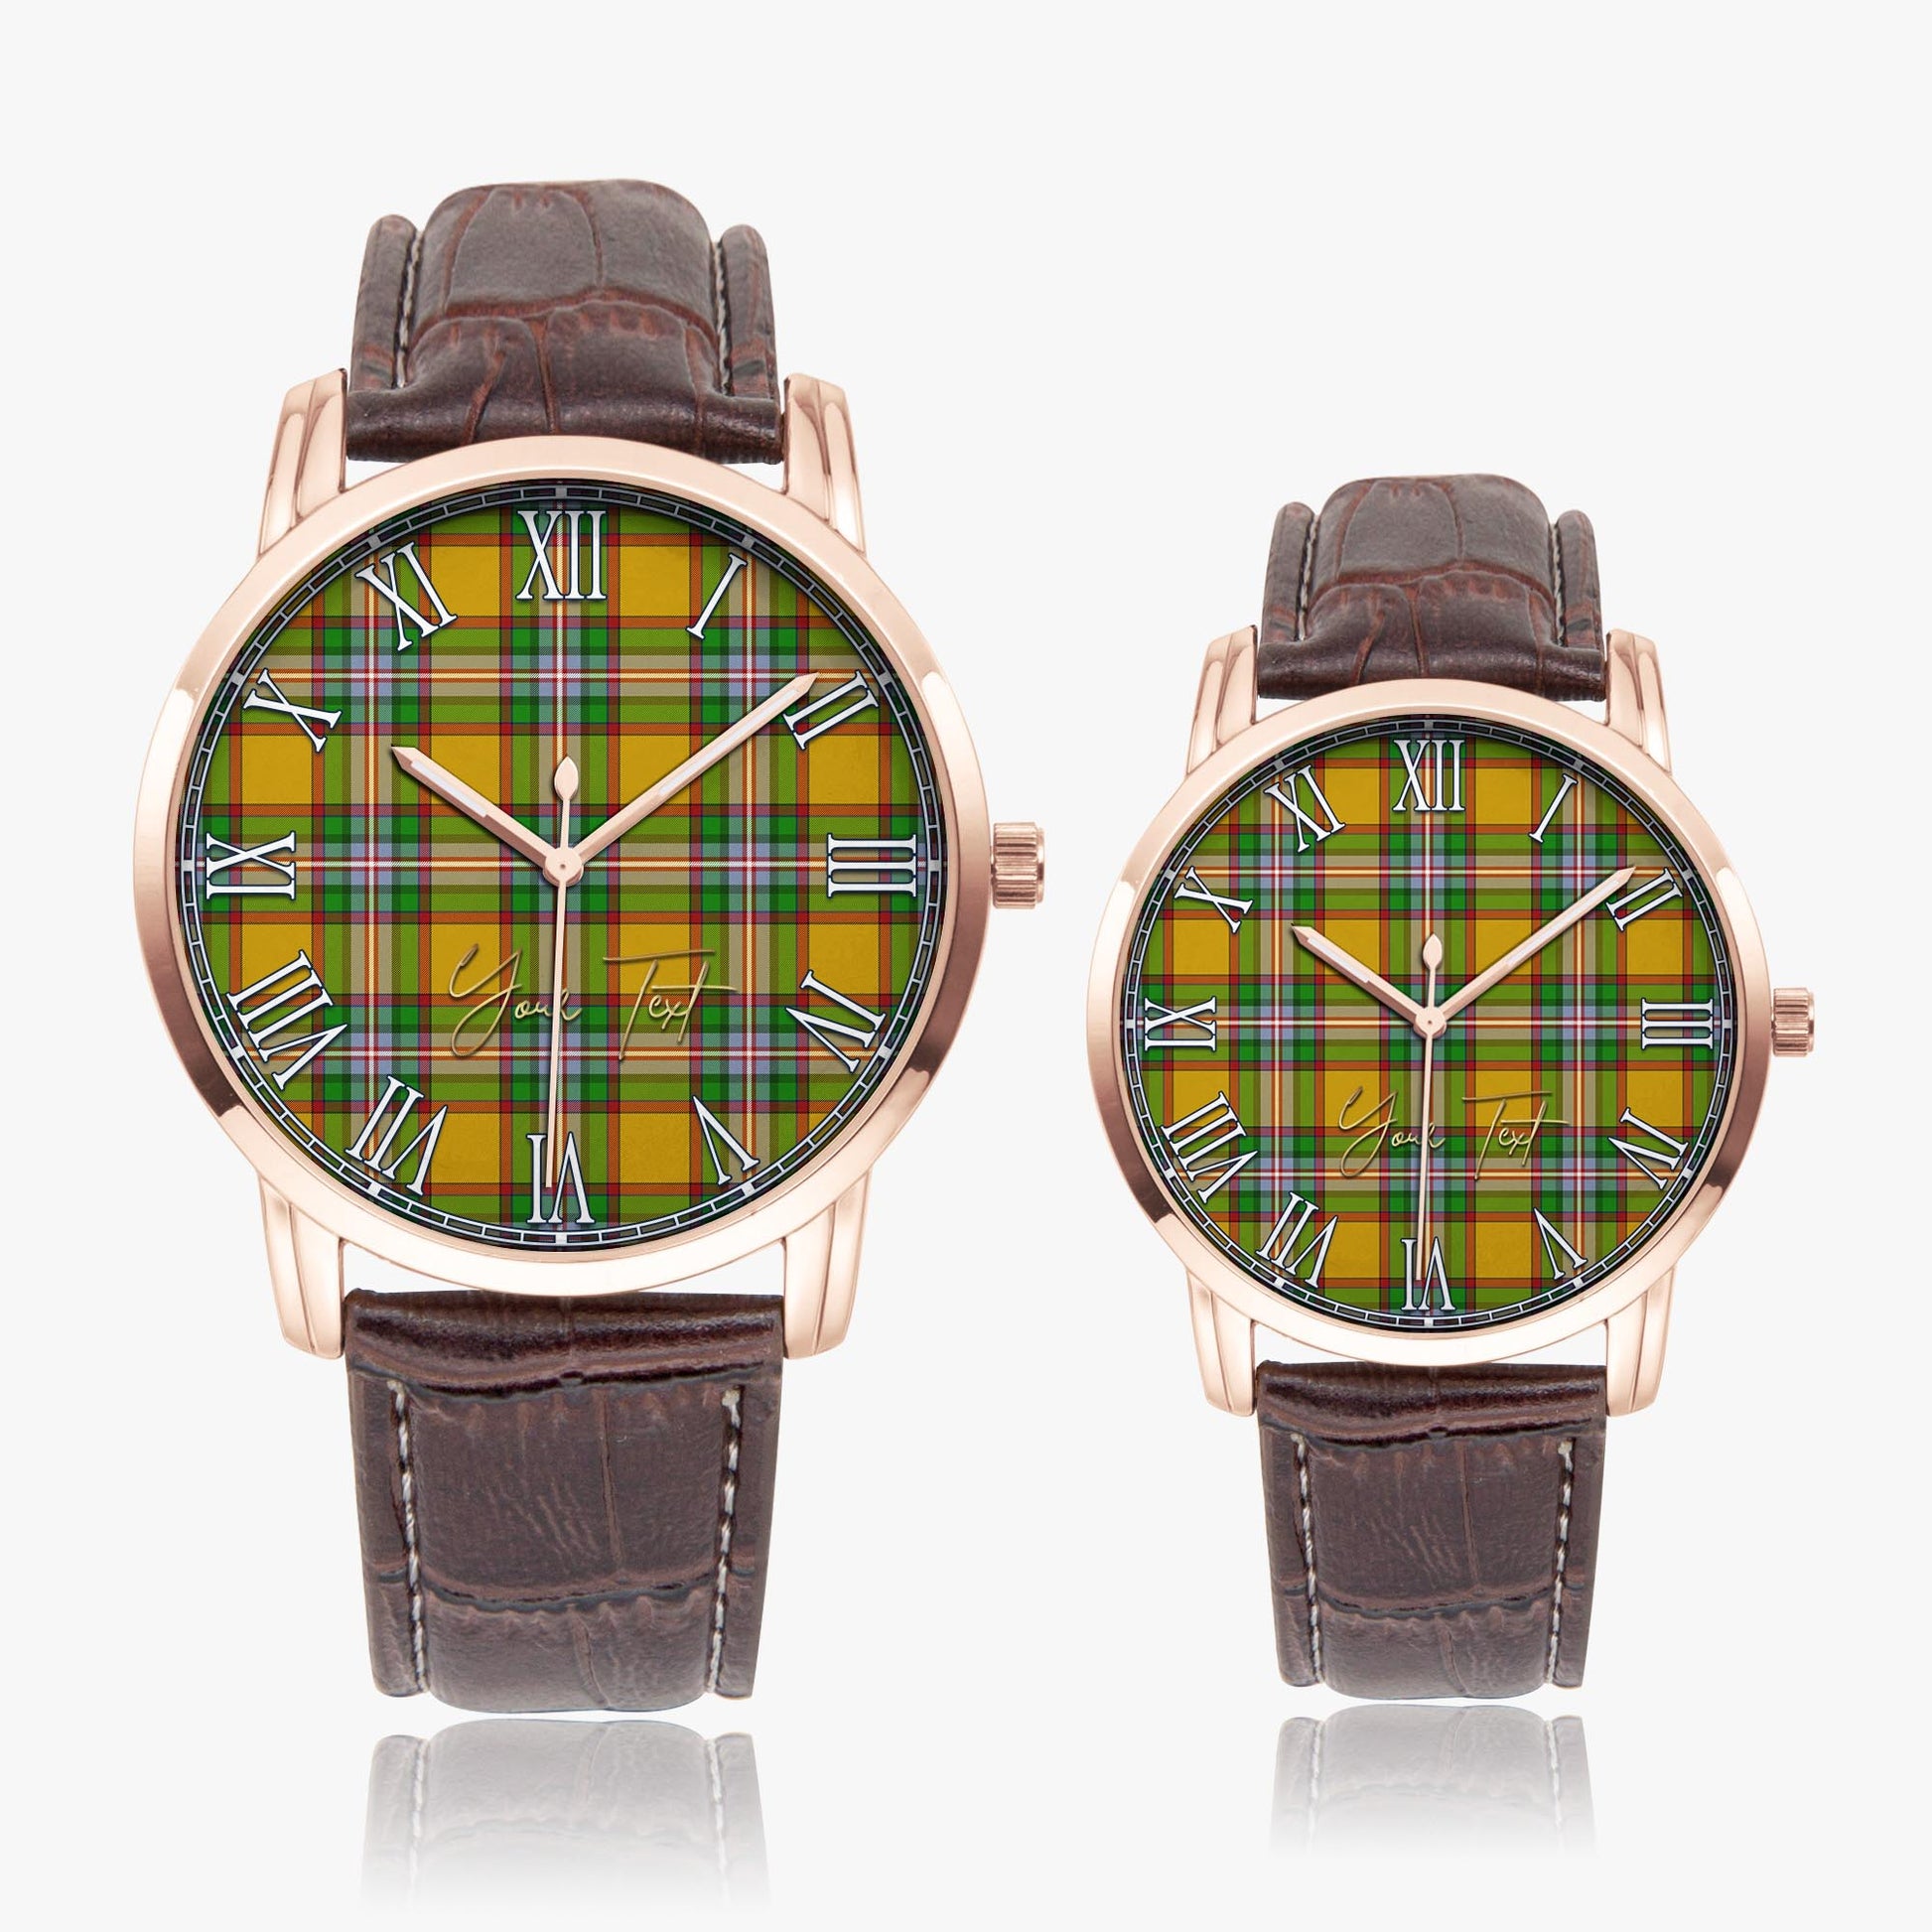 Essex County Canada Tartan Personalized Your Text Leather Trap Quartz Watch Wide Type Rose Gold Case With Brown Leather Strap - Tartanvibesclothing